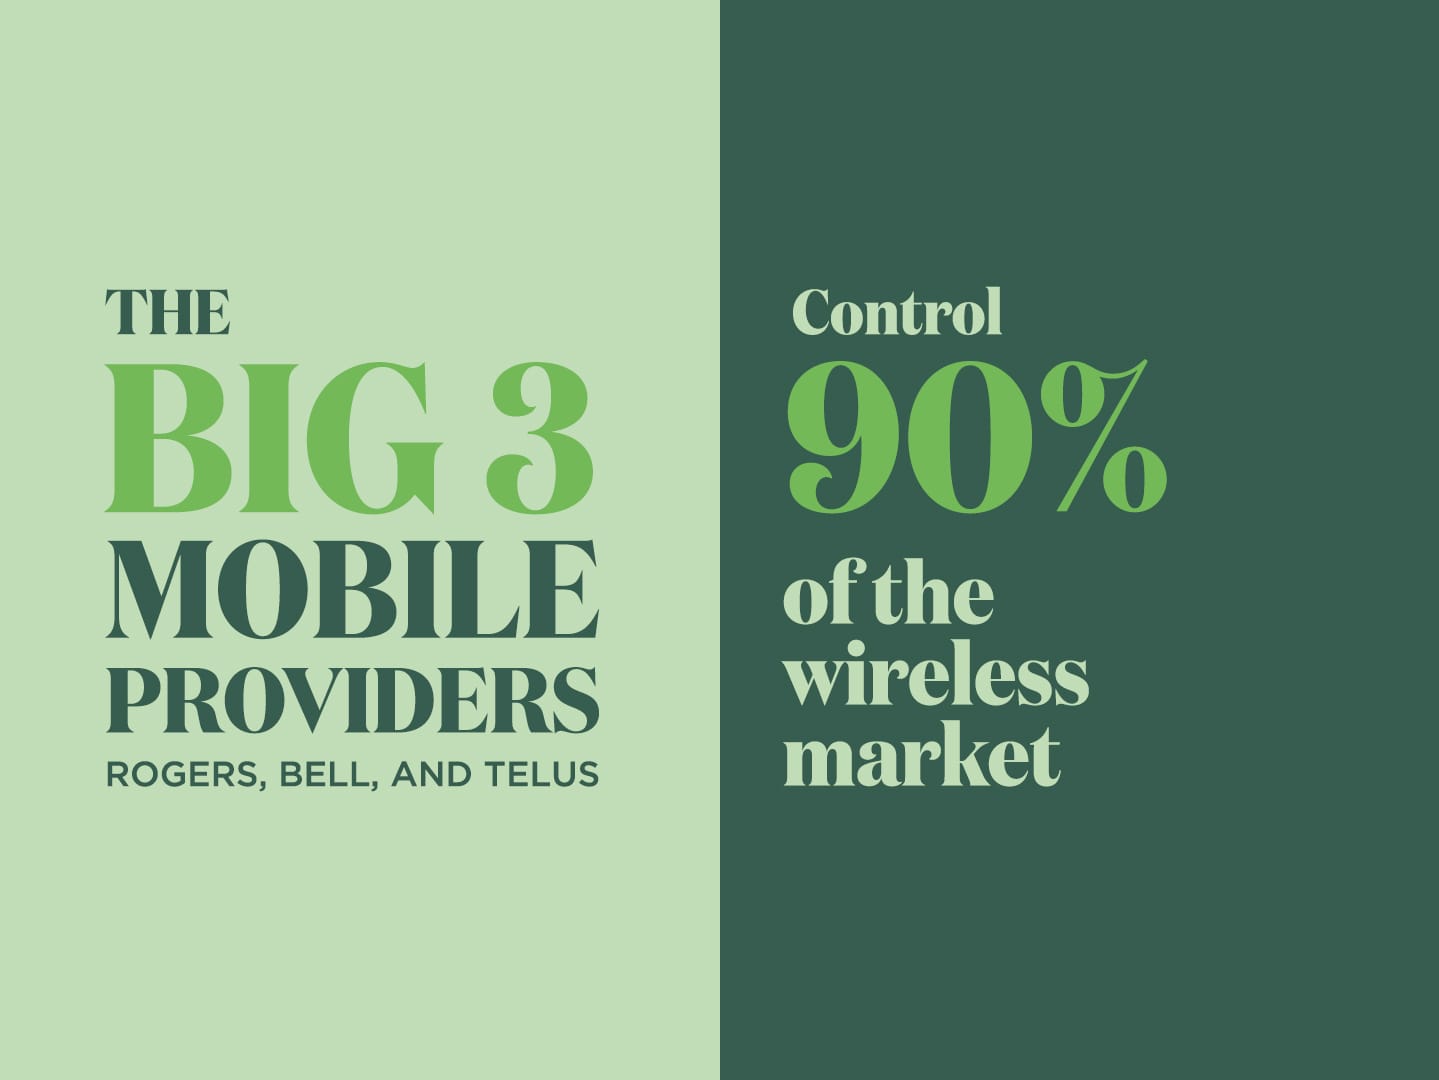 The Big 3 mobiles providers Rogers, Bell, and Telu